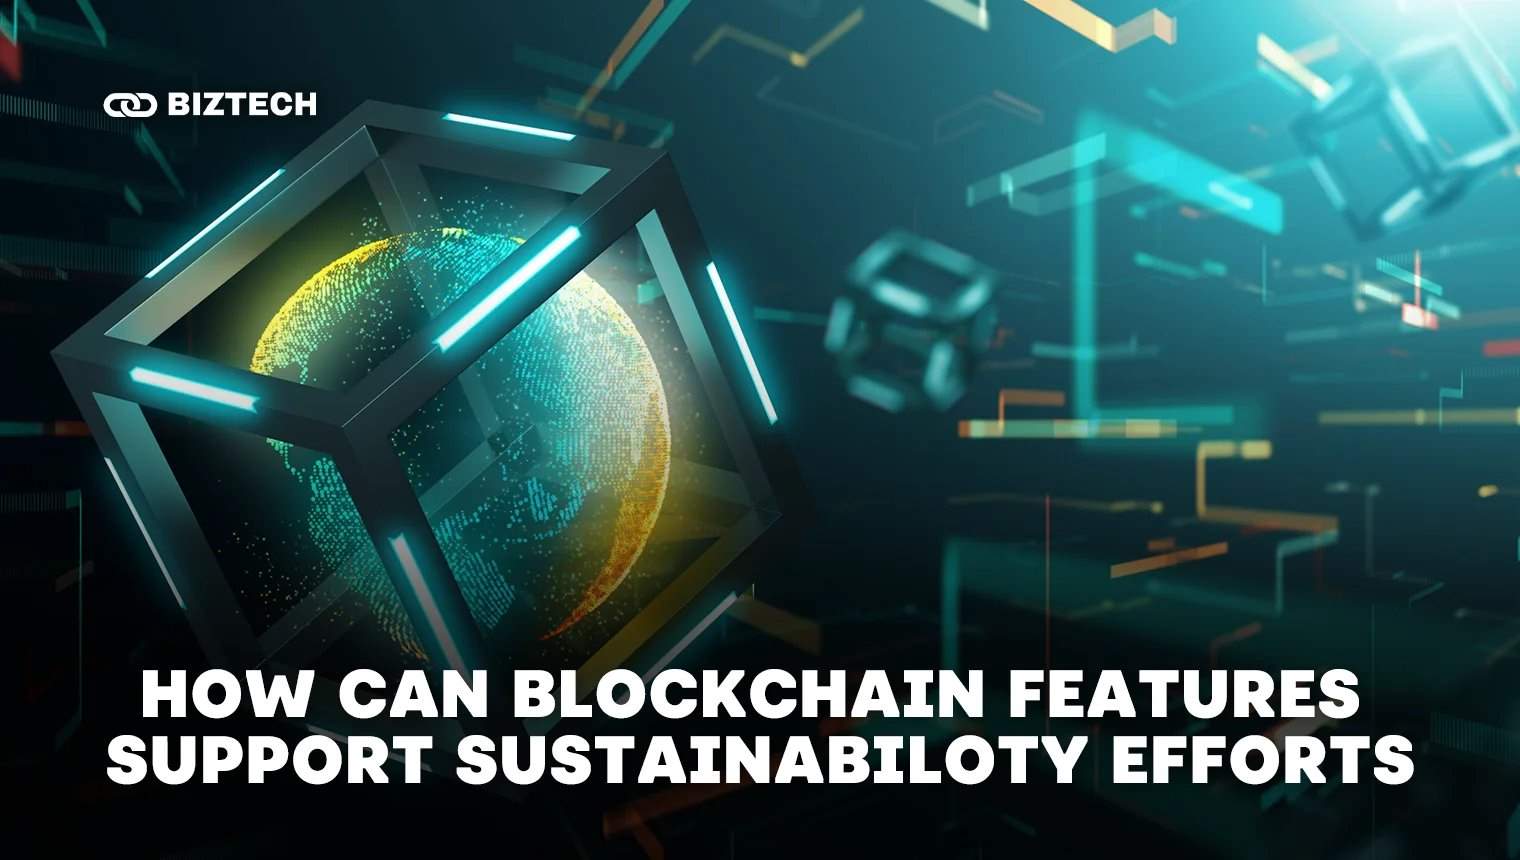 How Can Blockchain Features Support Sustainabiloty Efforts